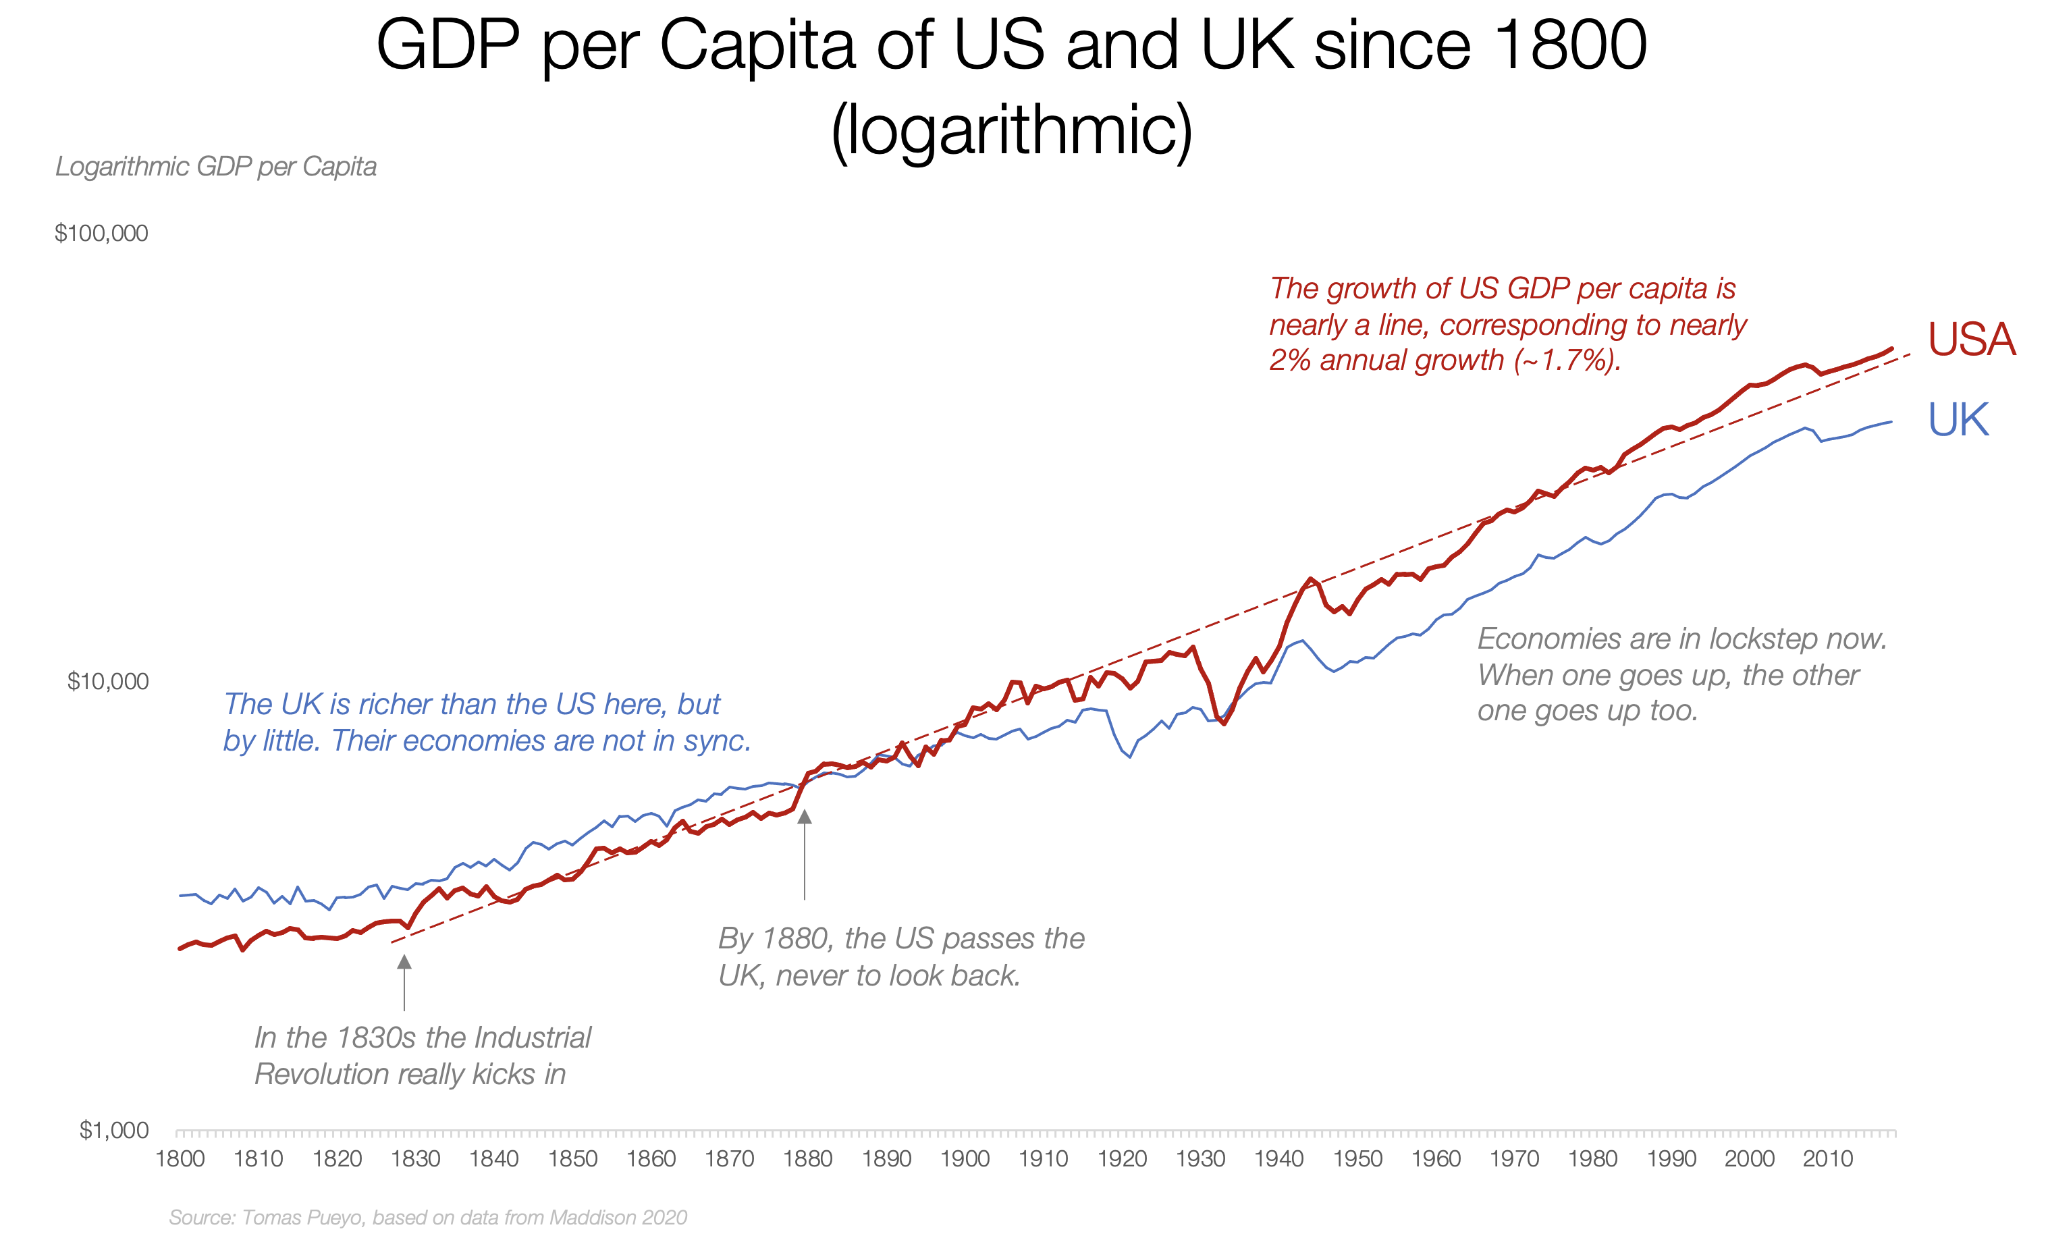 GDP US & UK since 1800, journal of wild culture ©2021